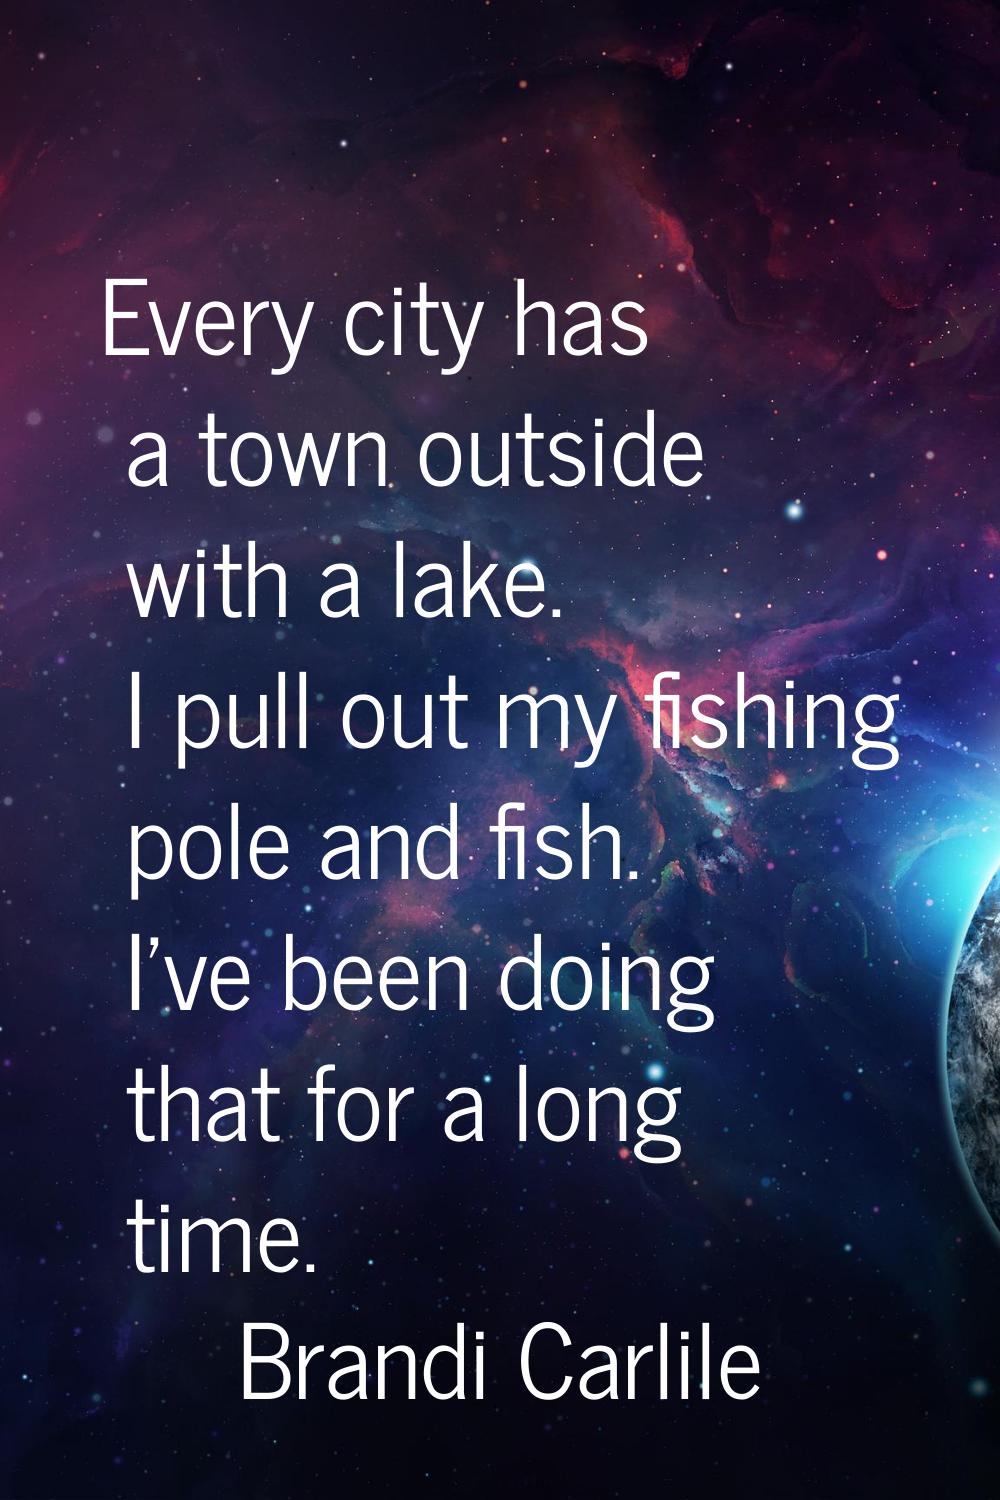 Every city has a town outside with a lake. I pull out my fishing pole and fish. I've been doing tha